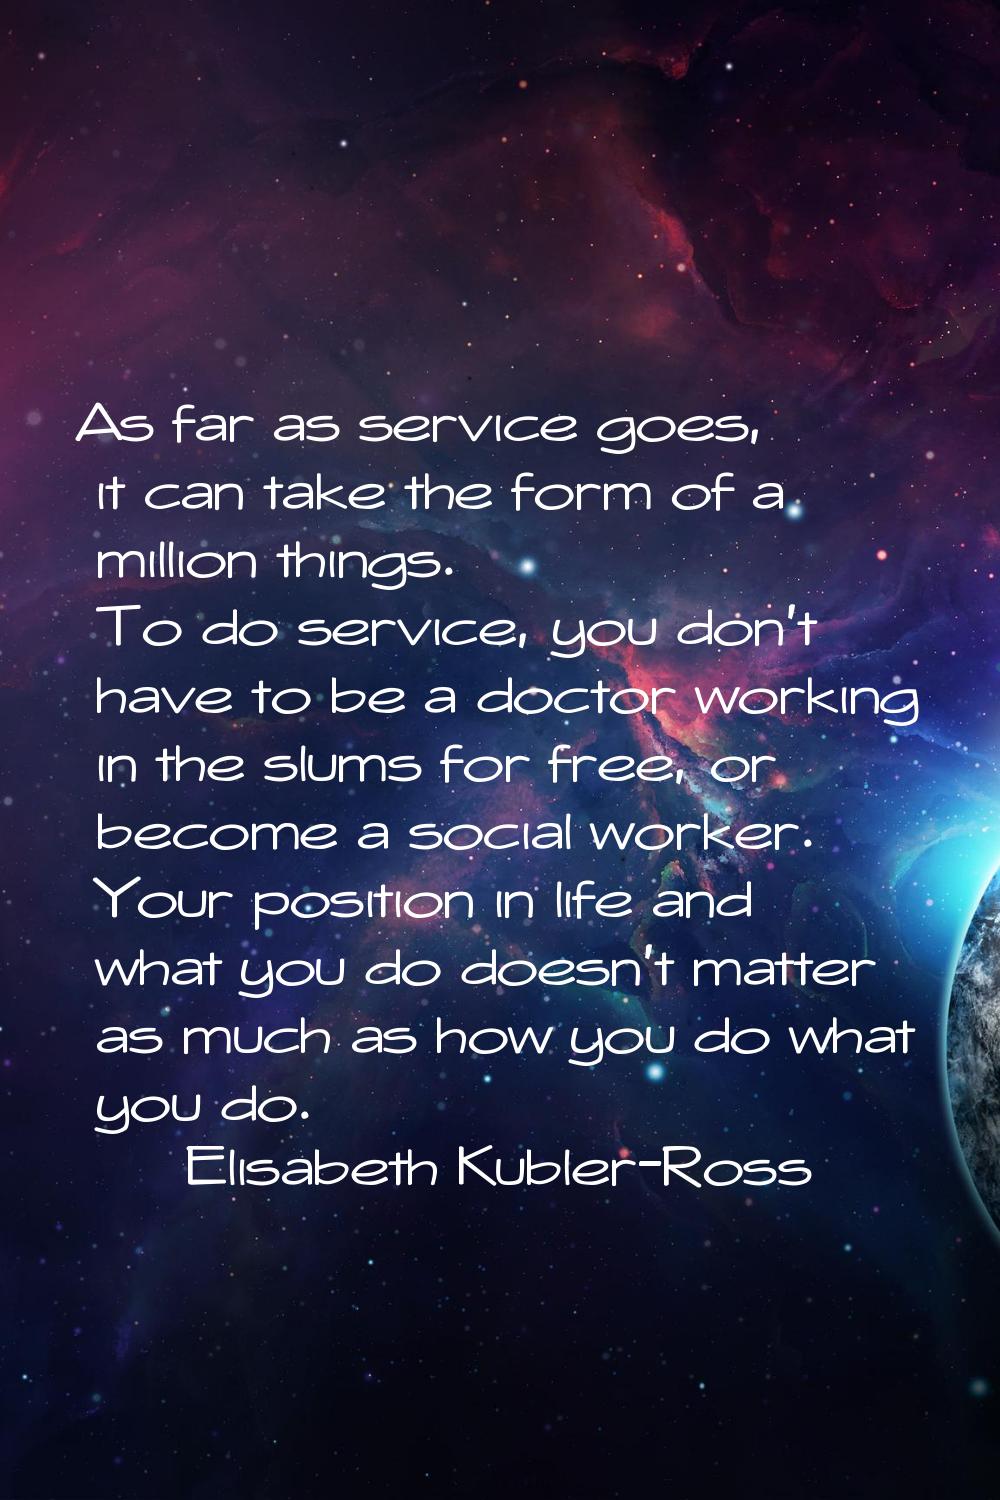 As far as service goes, it can take the form of a million things. To do service, you don't have to 